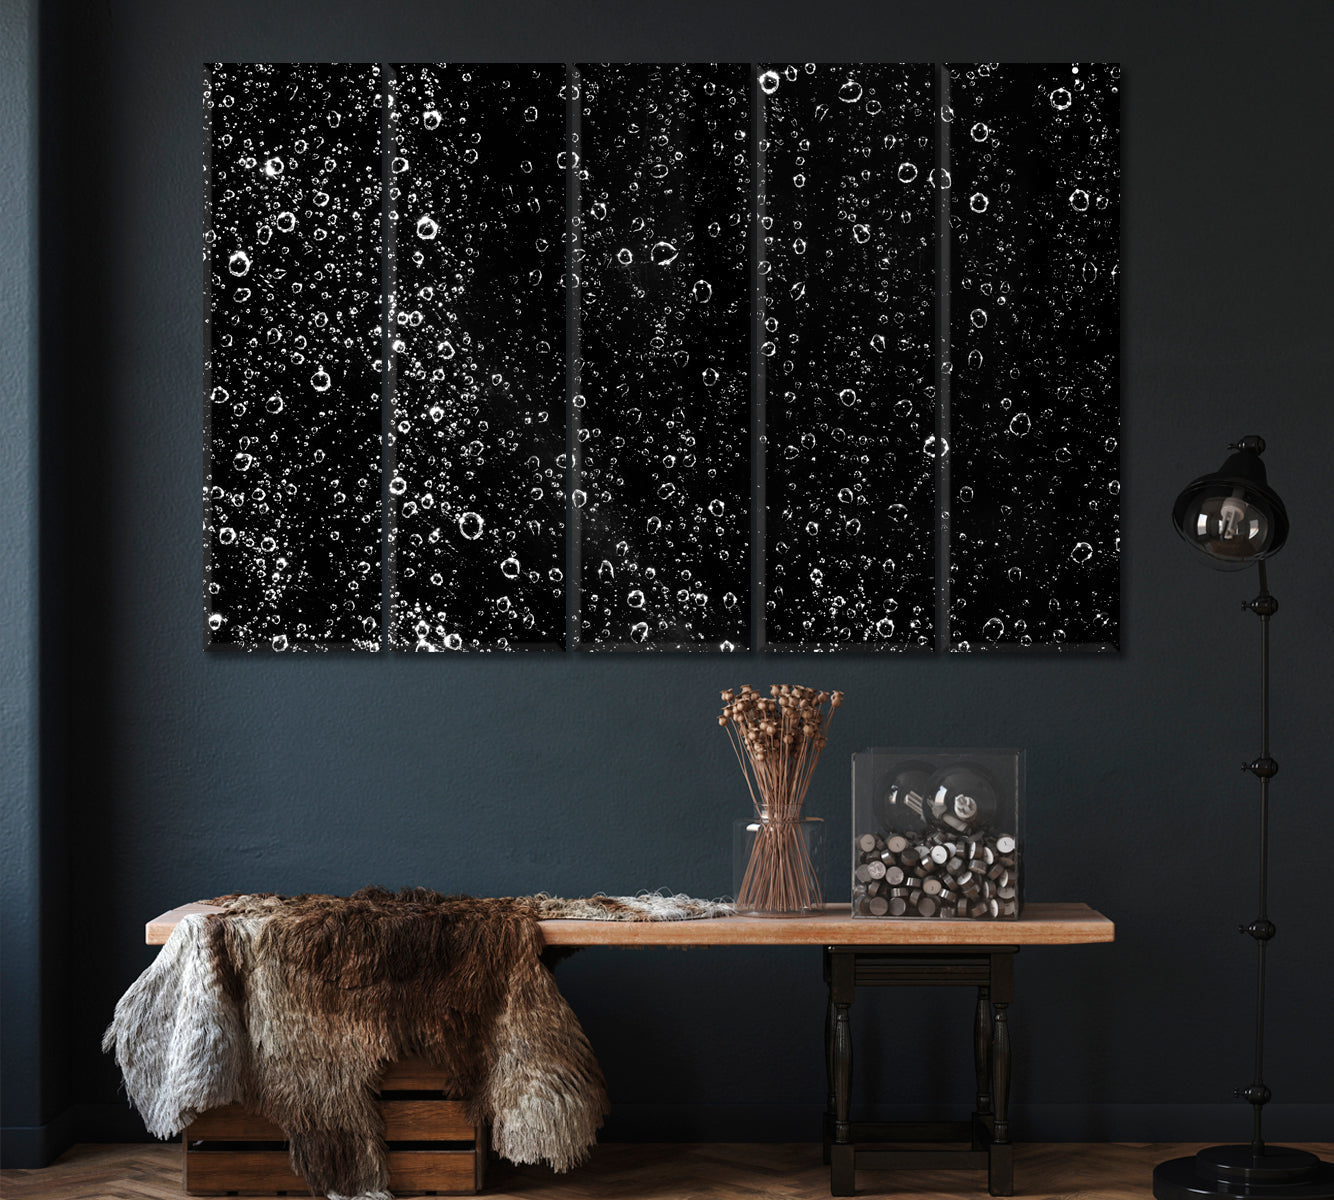 Bubbles in Dark Water Canvas Print ArtLexy 5 Panels 36"x24" inches 